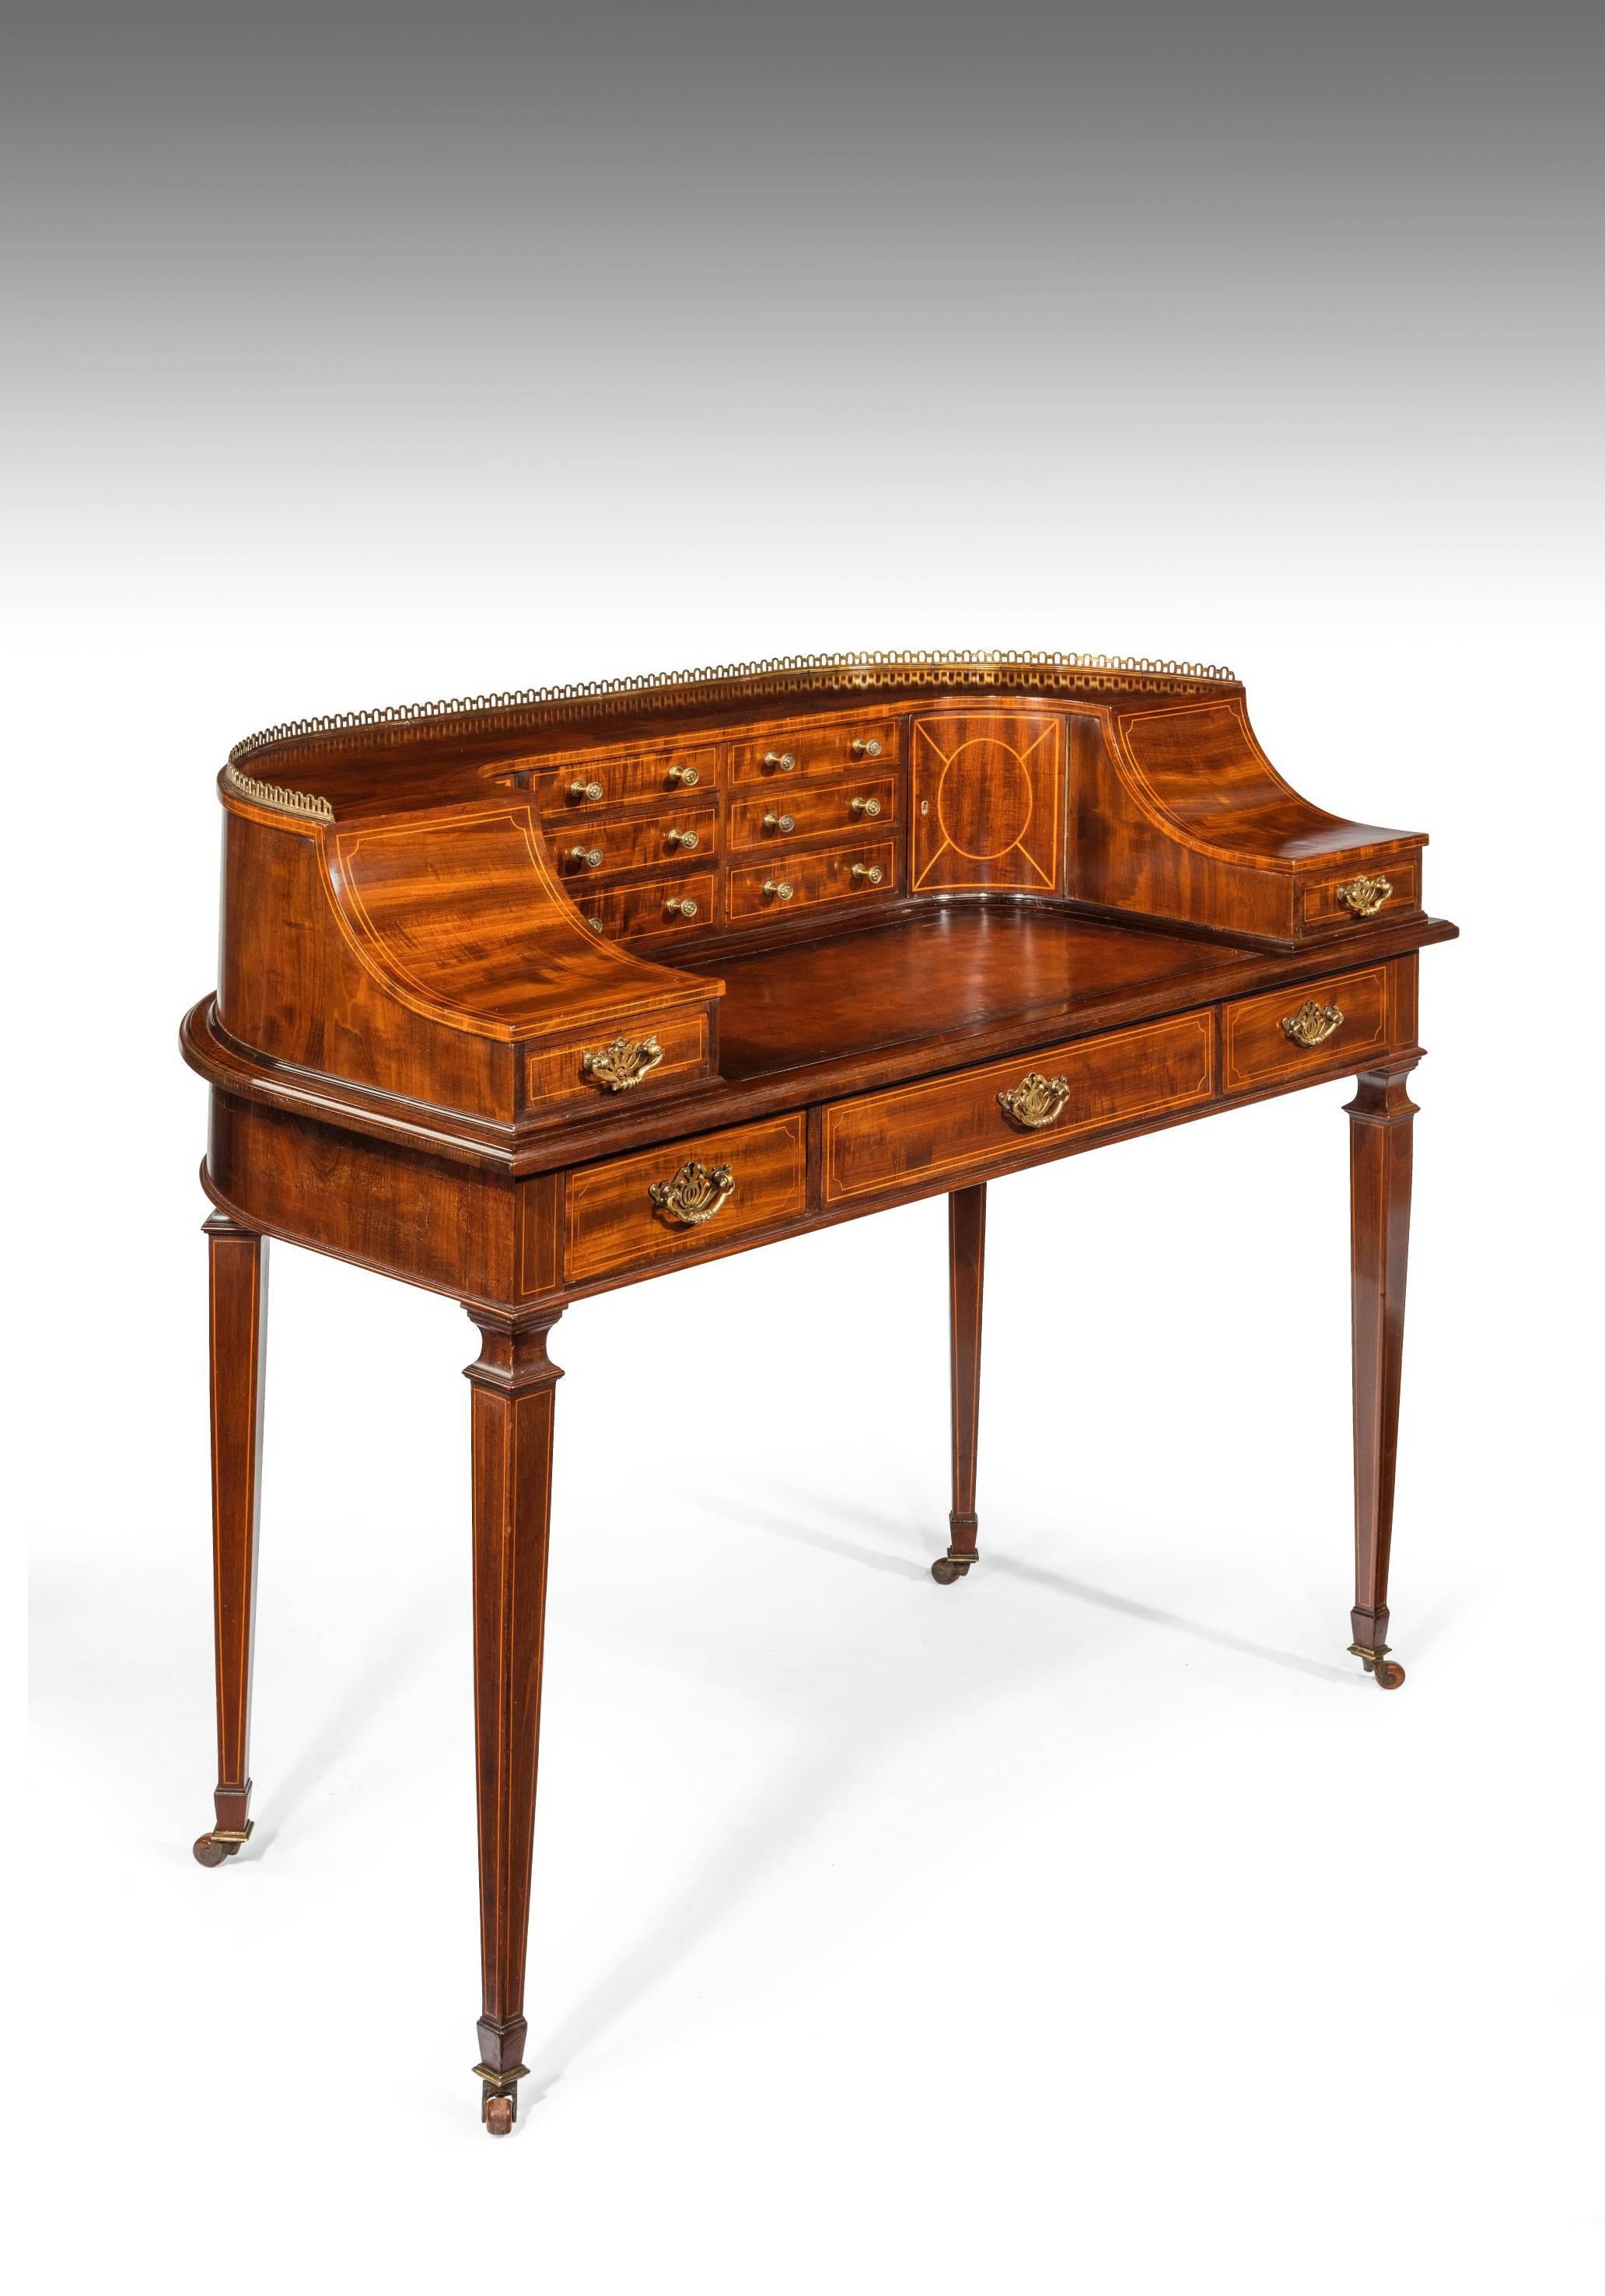 A fine quality late 19th century mahogany Carlton House desk having a extremely good choice of mahogany used, often referred to as fiddleback mahogany. 
The brass gallery shaped back having an arrangement of drawers in the centre with a pair of